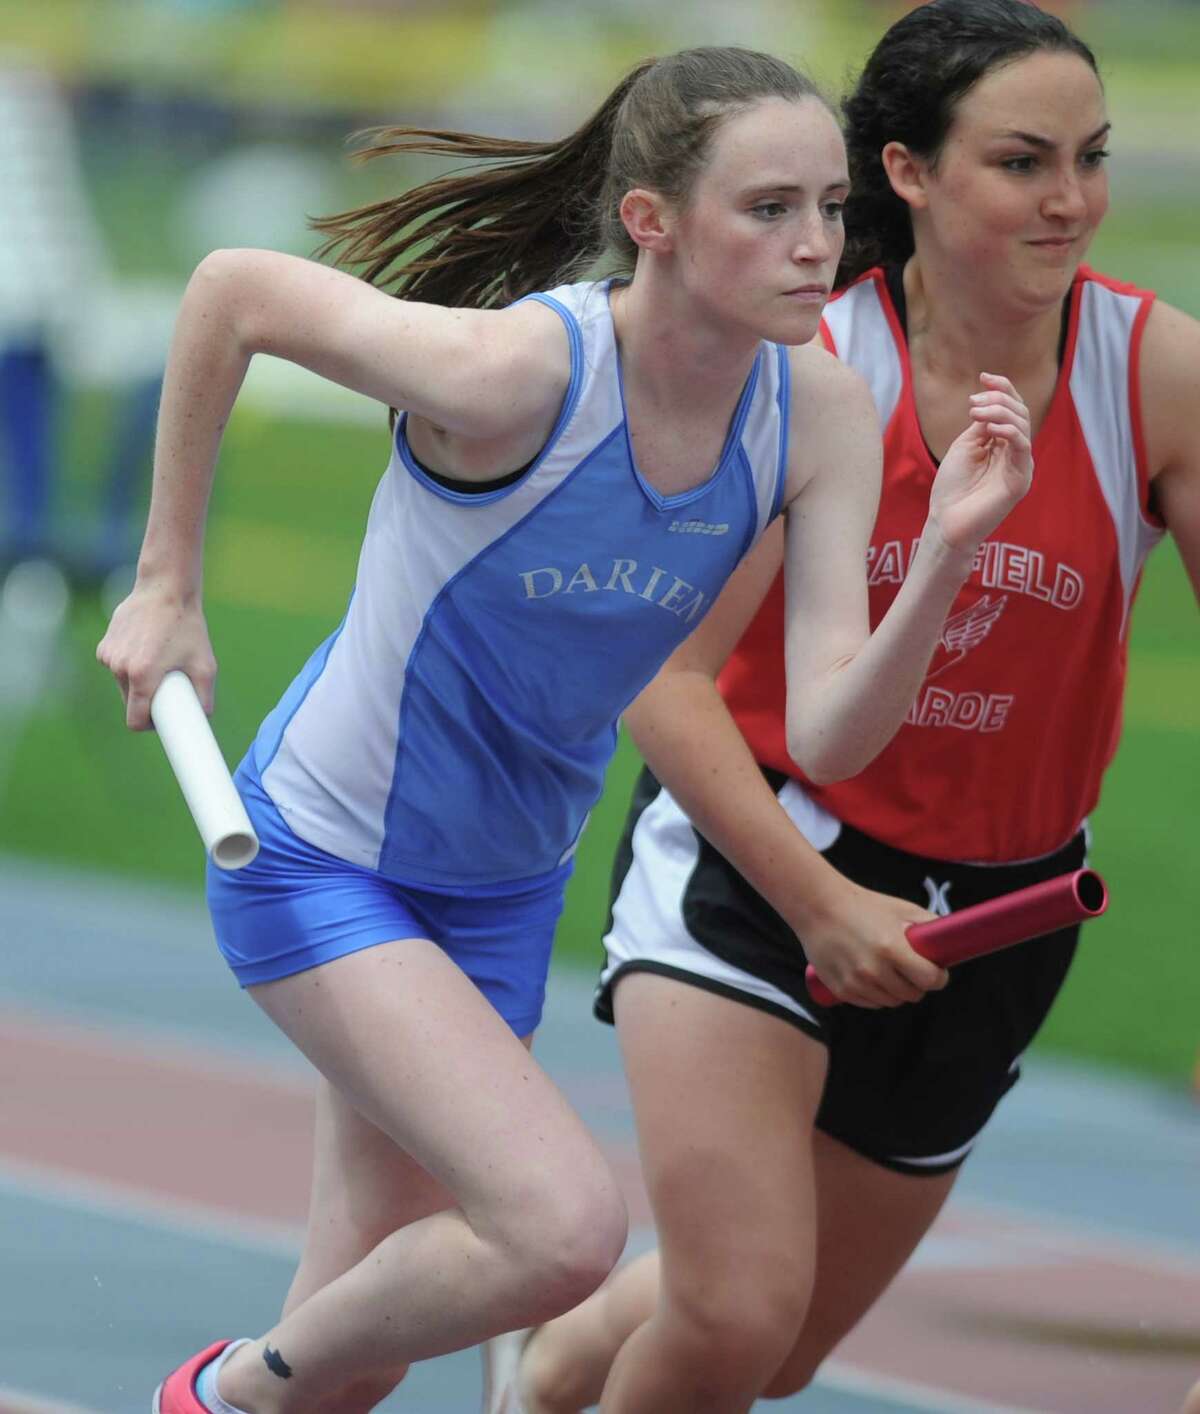 Darien's Sarah Colon, far left, competes in the 4x800 meter relay during the FCIAC boys and girls track championships held Tuesday, May 22, 2012 at Danbury High School.